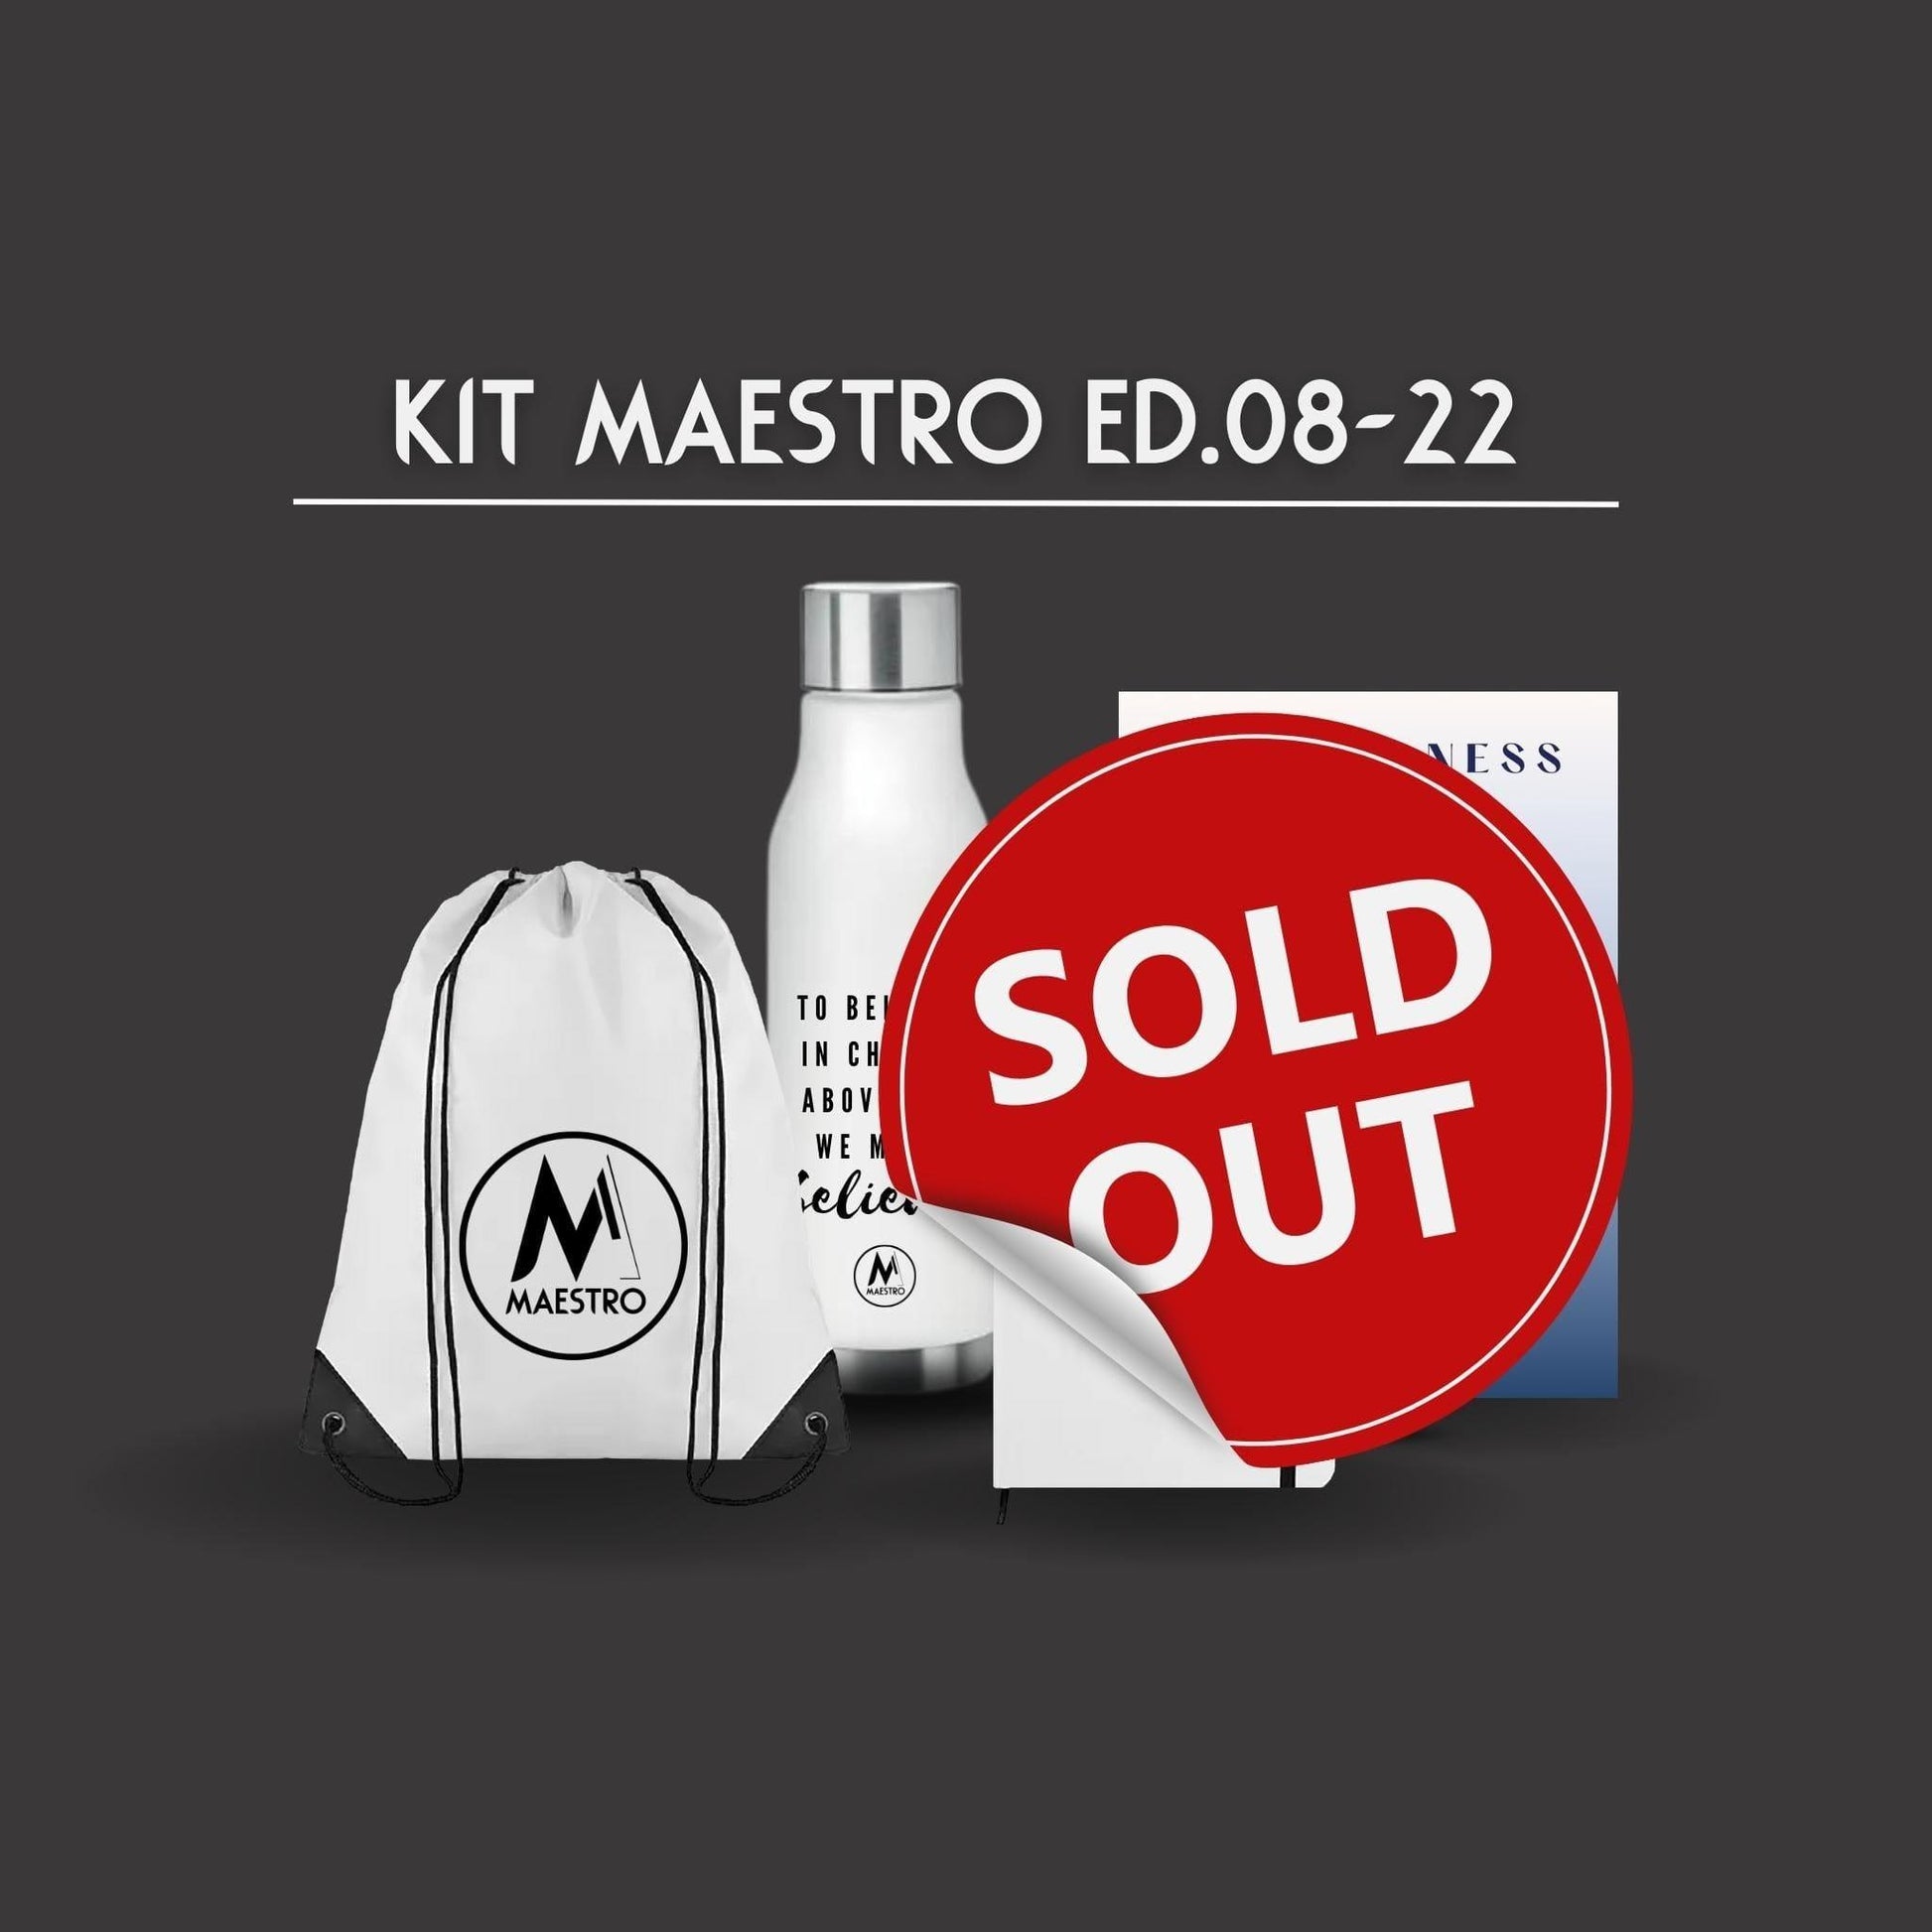 KIT MAESTRO - the gift box - past edition 08-22